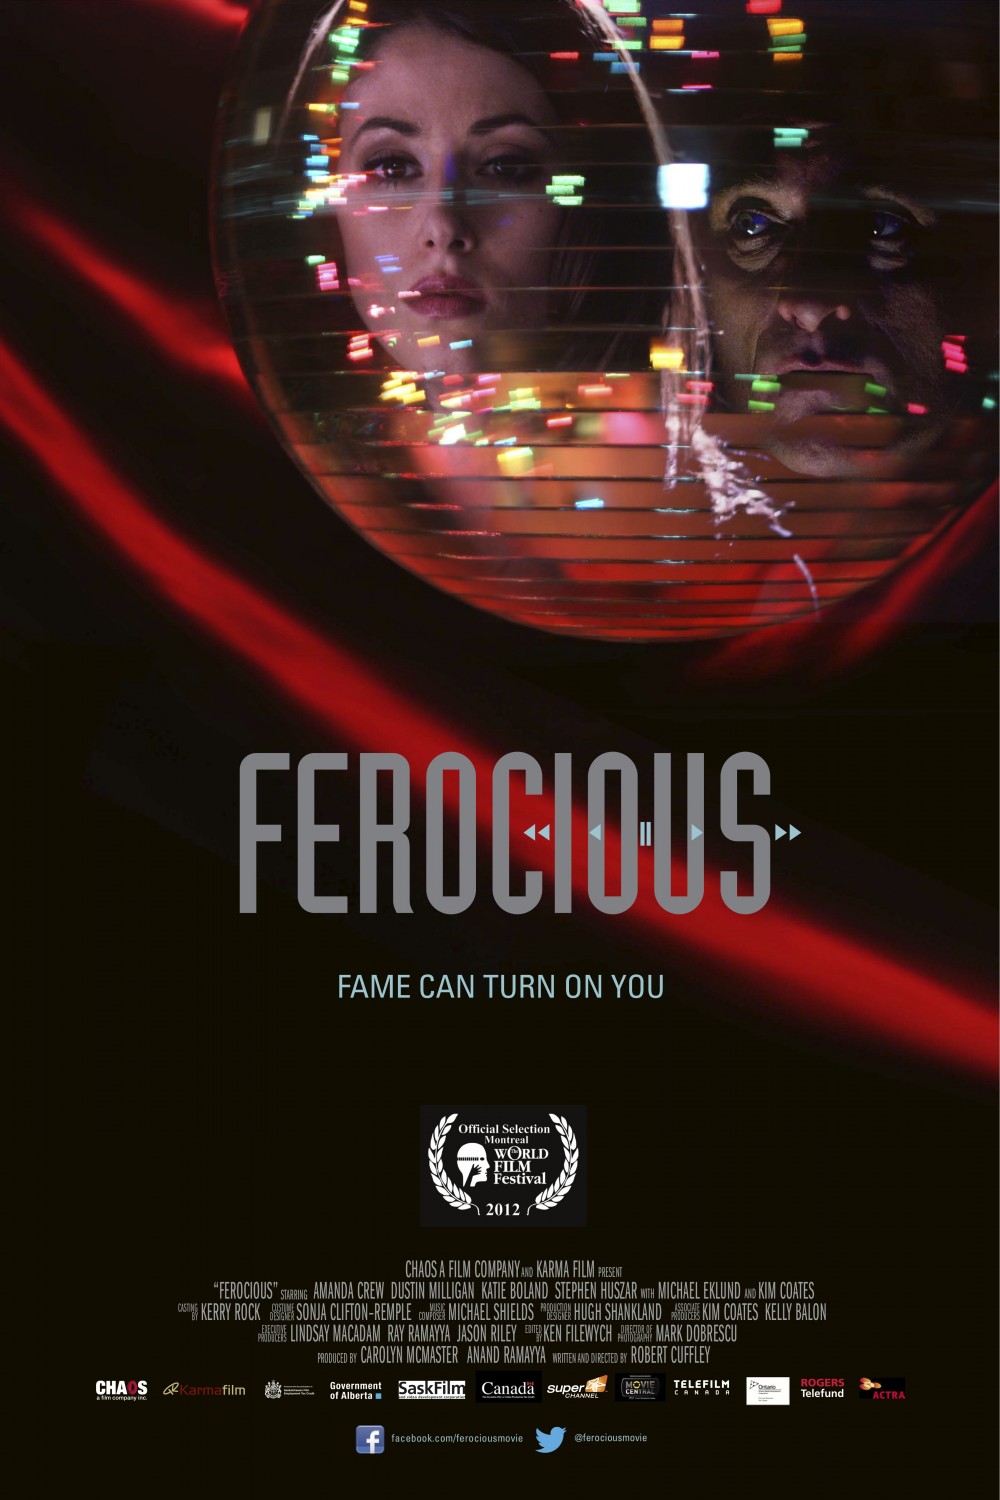 Extra Large Movie Poster Image for Ferocious 